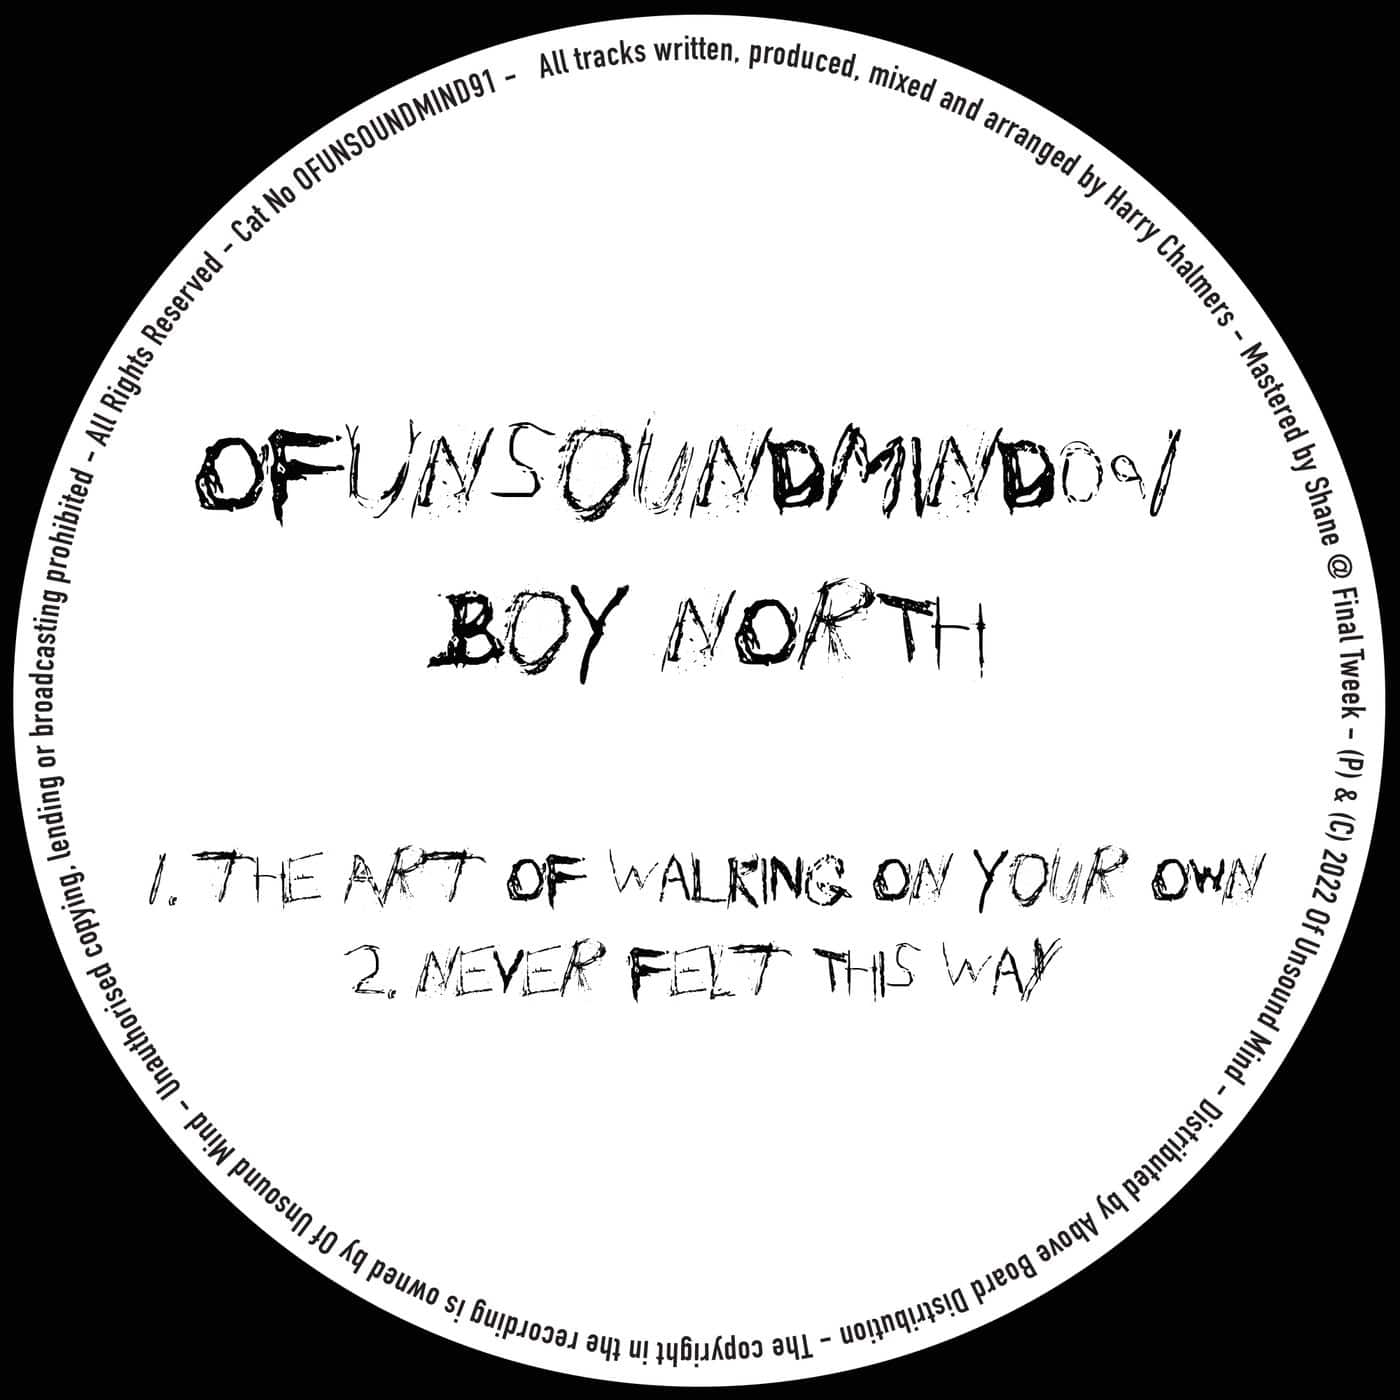 image cover: Boy North - The Art Of Walking On Your Own / Never Felt This Way / OFUNSOUNDMIND091